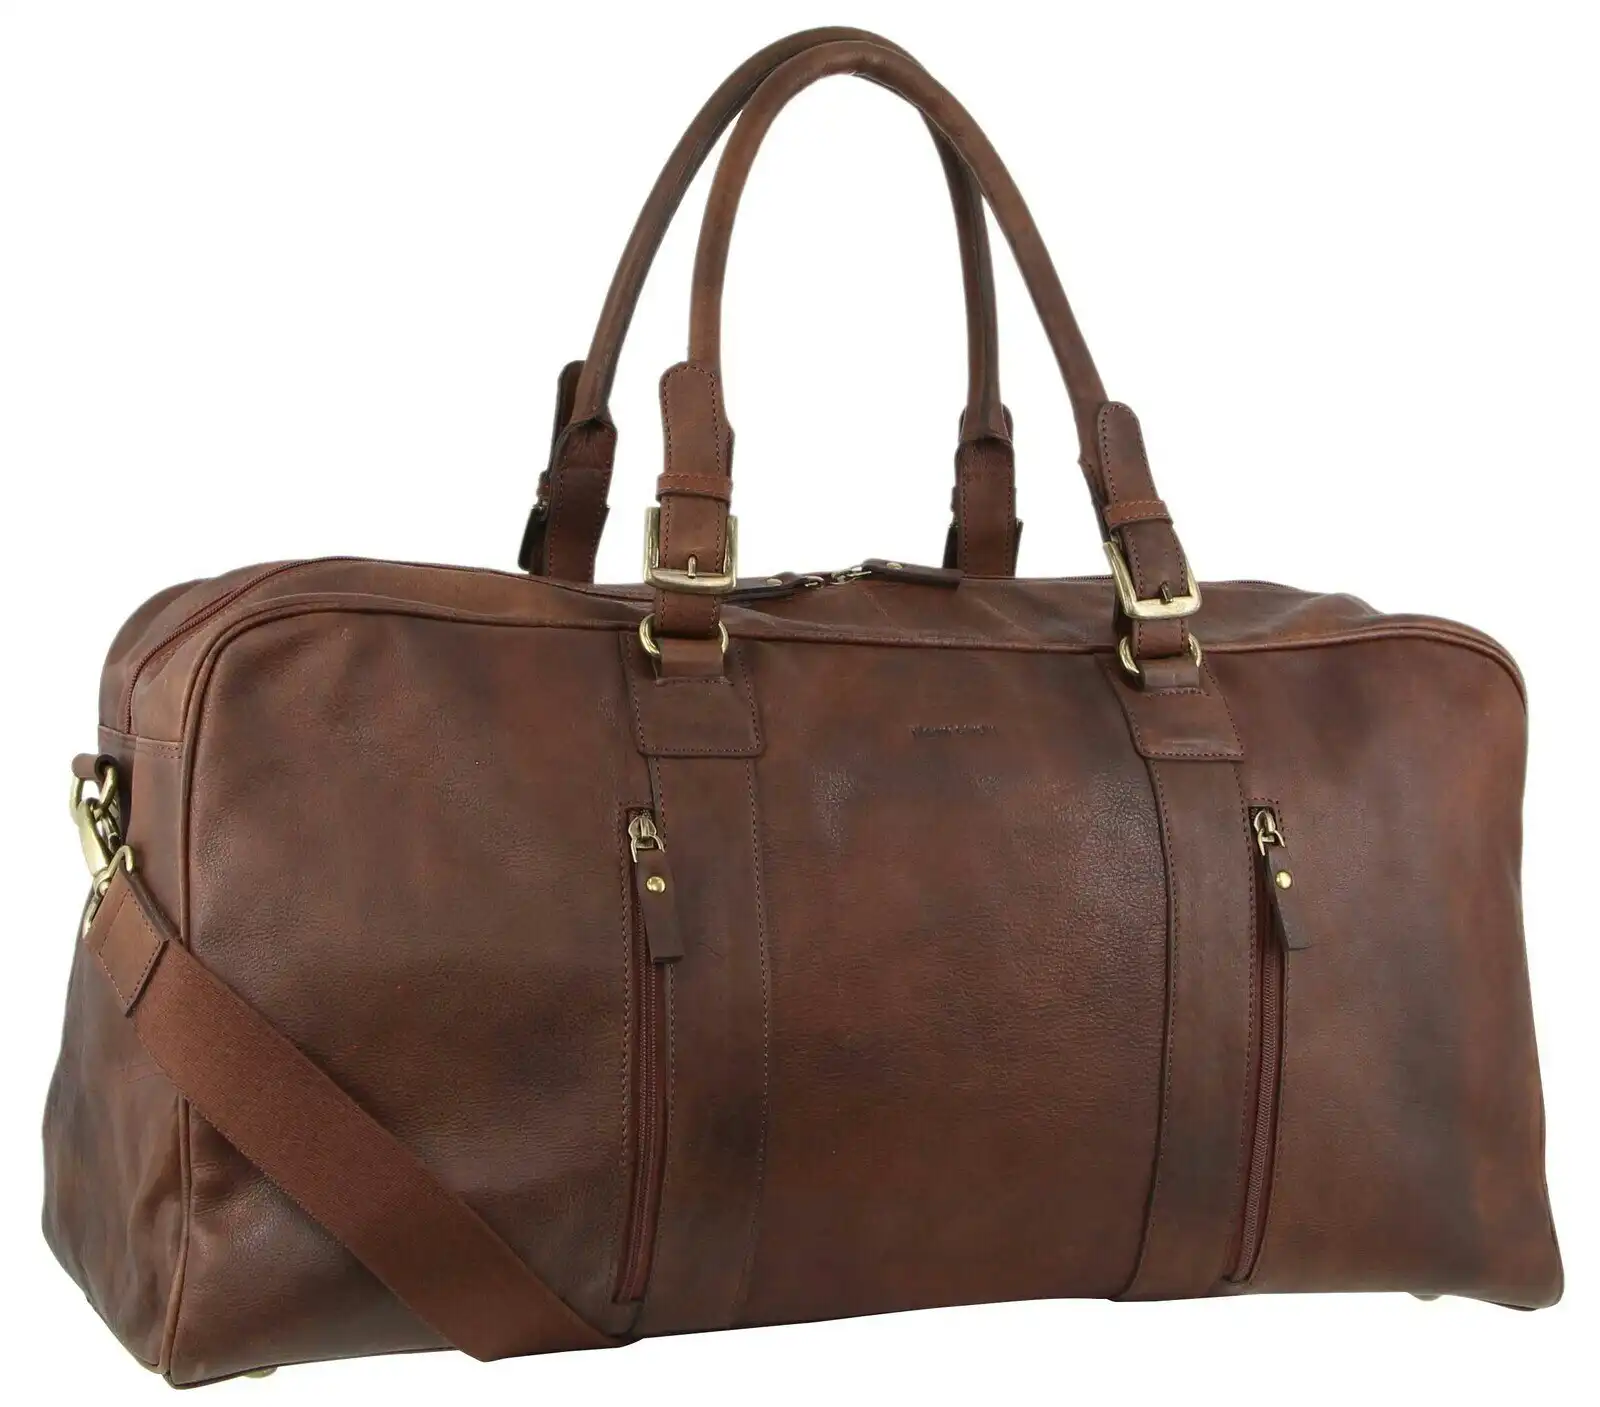 Pierre Cardin Rustic Leather Travel Business Trip Bag Overnight - Chocolate